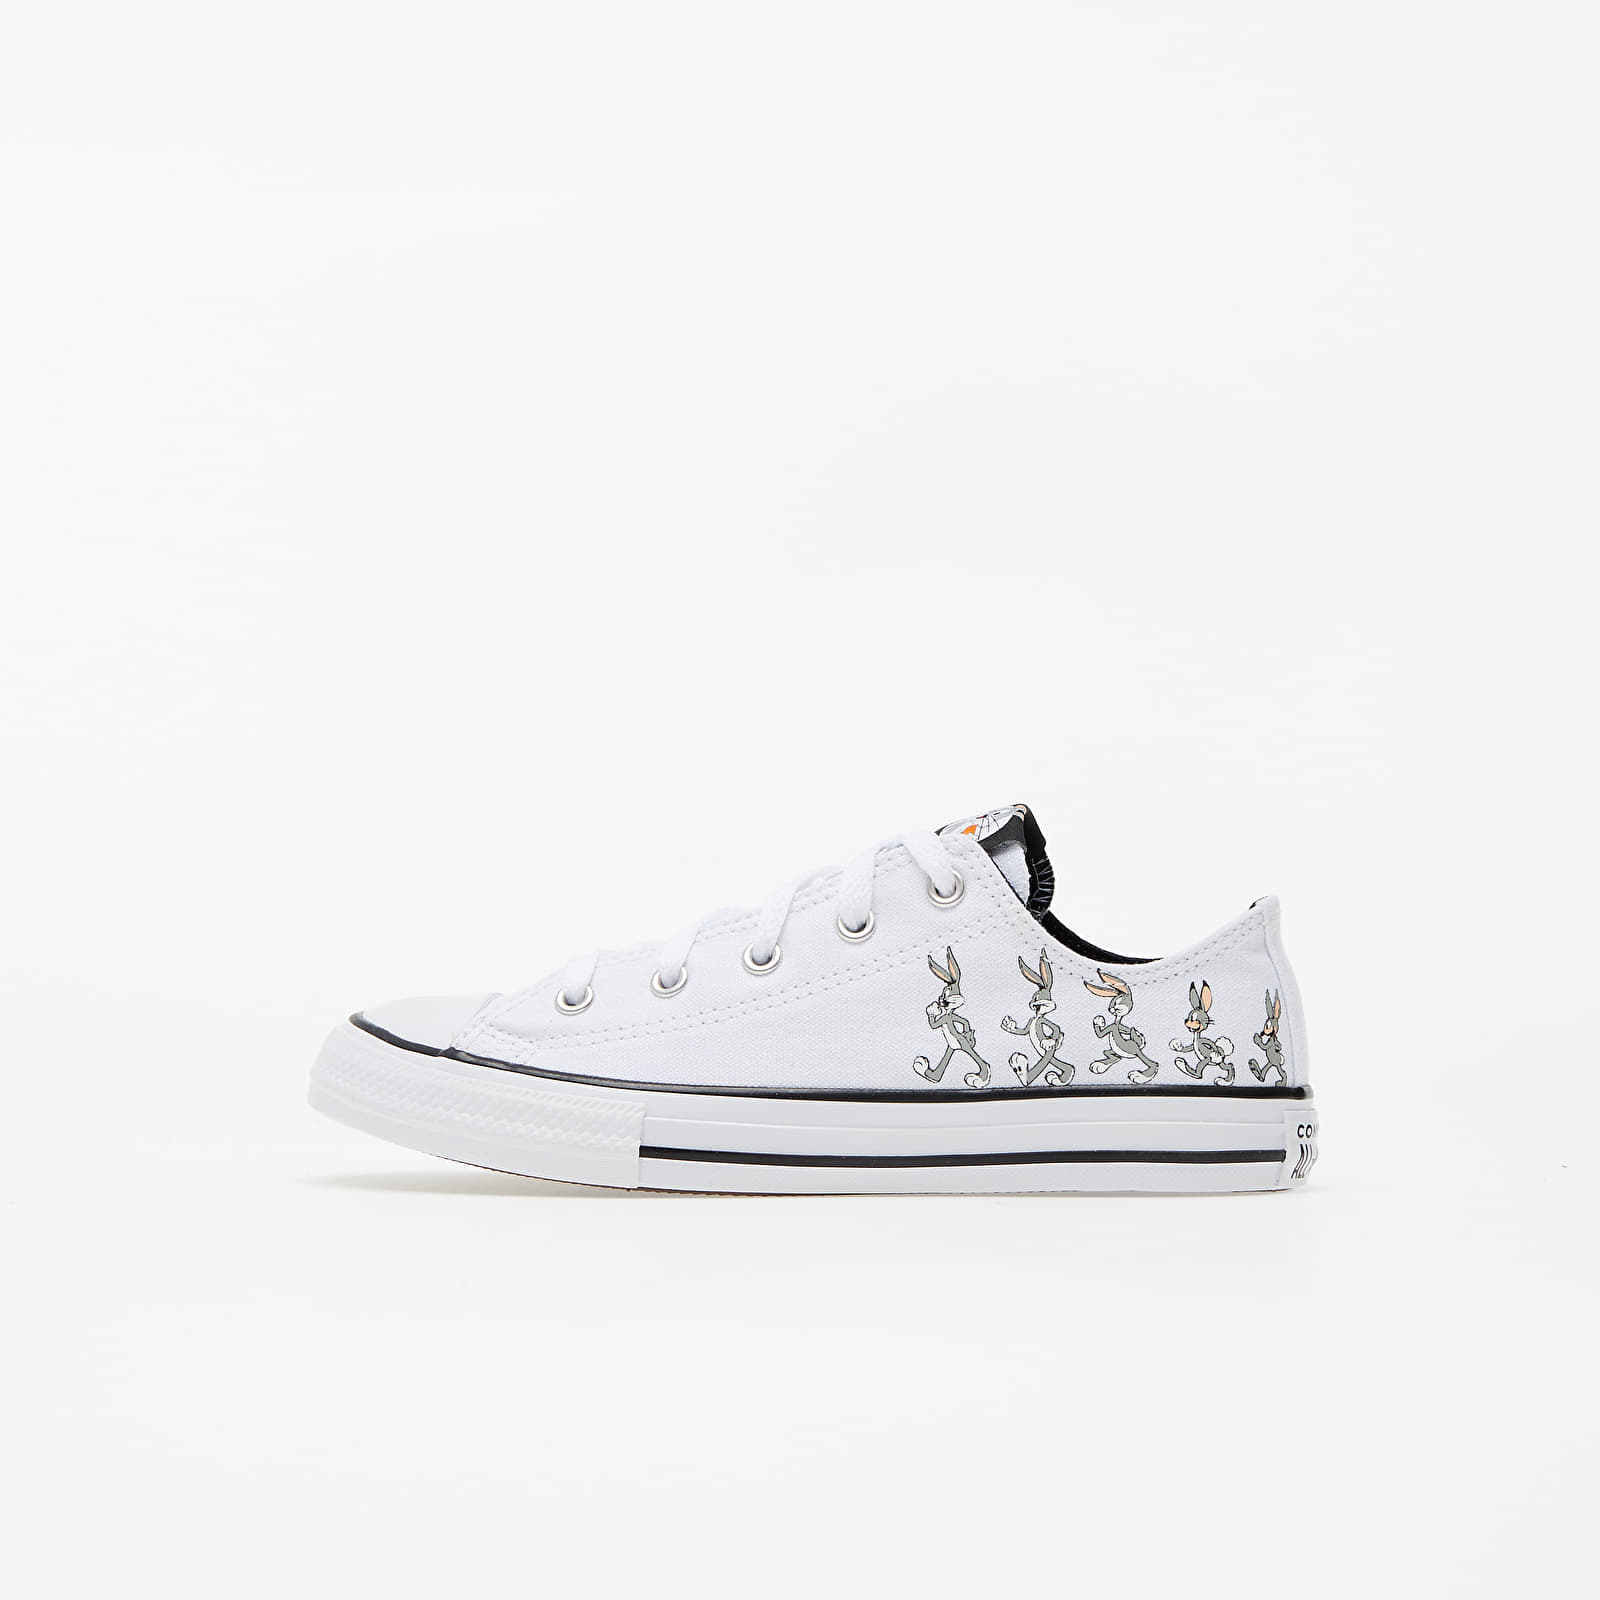 Chaussures et baskets enfants Converse x Bugs Bunny Chuck Taylor All Star OX Grey/ White